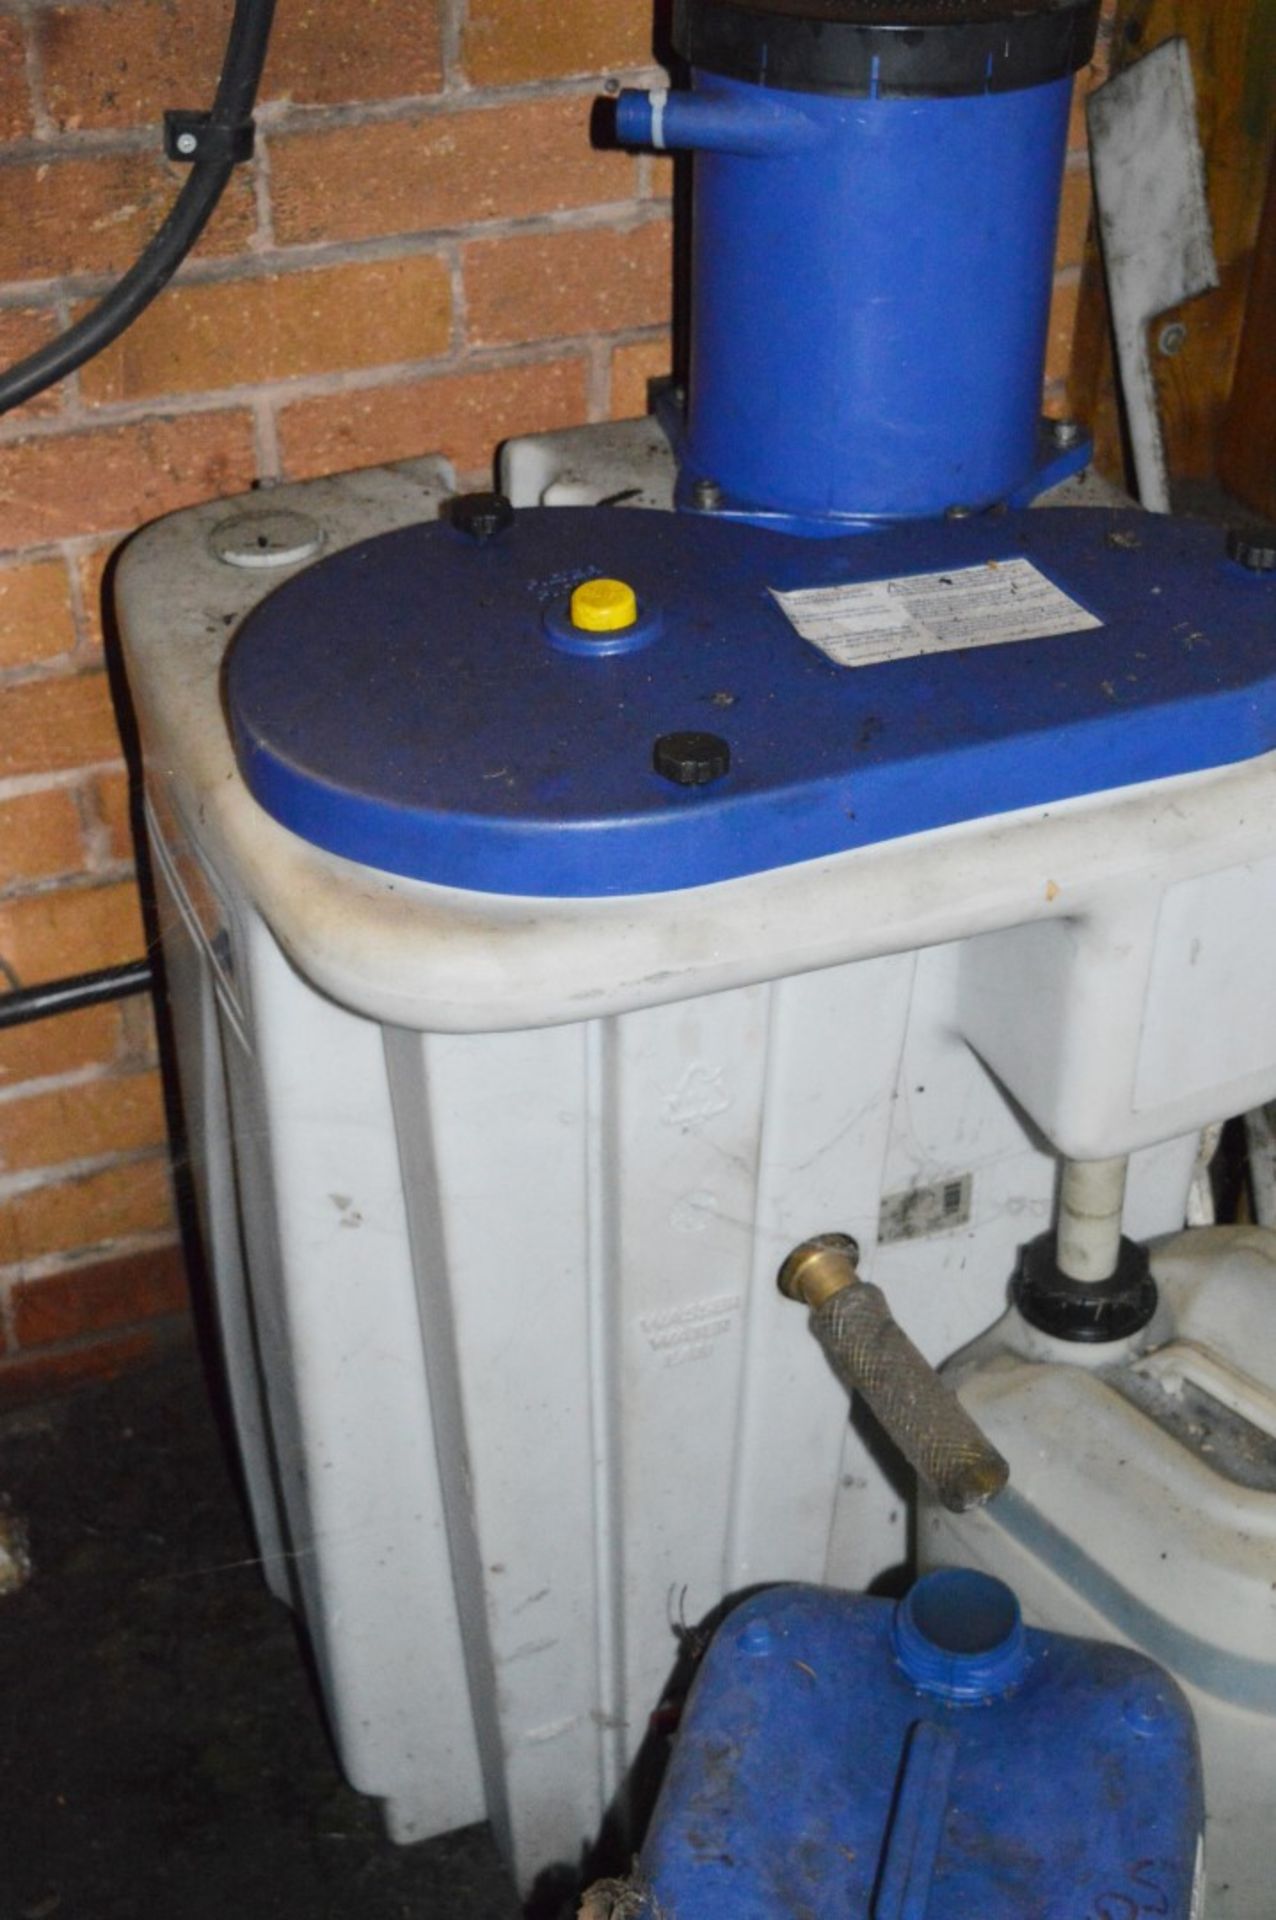 1 x Owamat 4 Oil / Water Separator - CL202 - Ref EN000 - Location: Worcester WR14 - Image 2 of 4